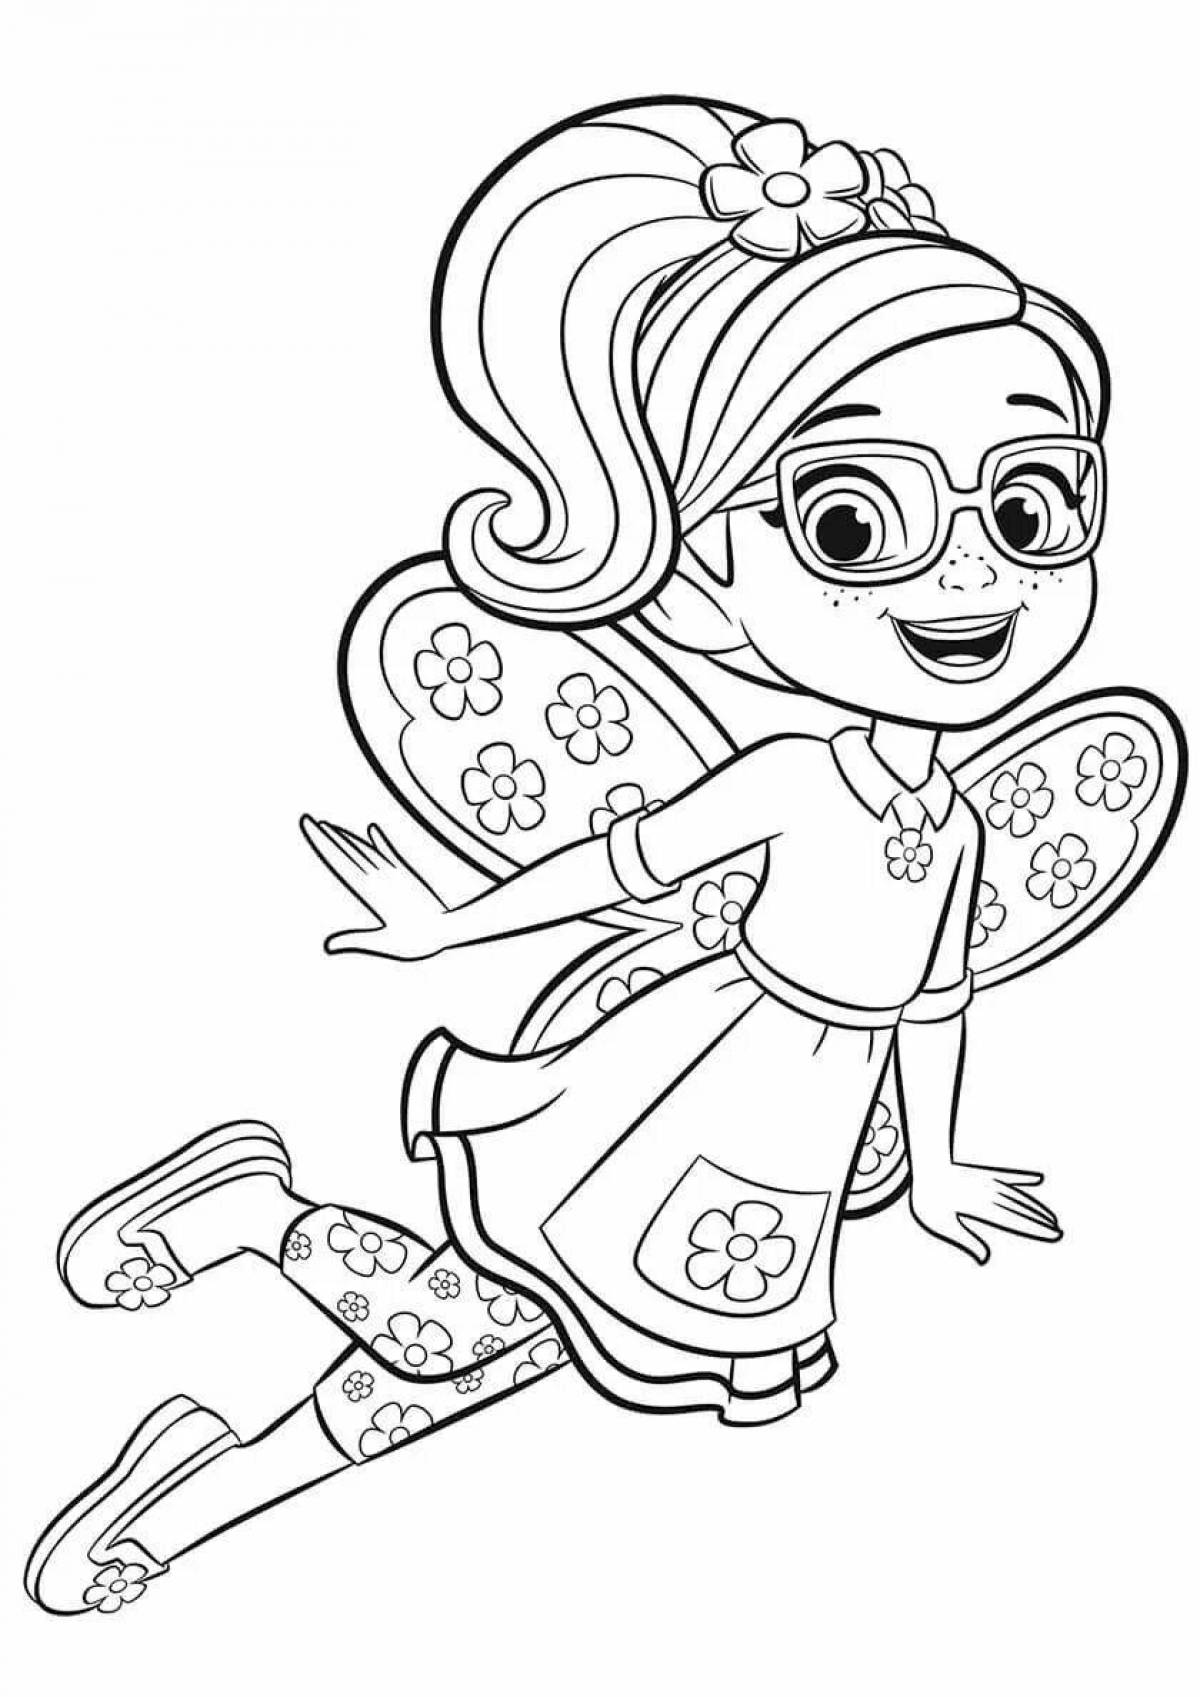 Fairy hypnotic coloring book for kids